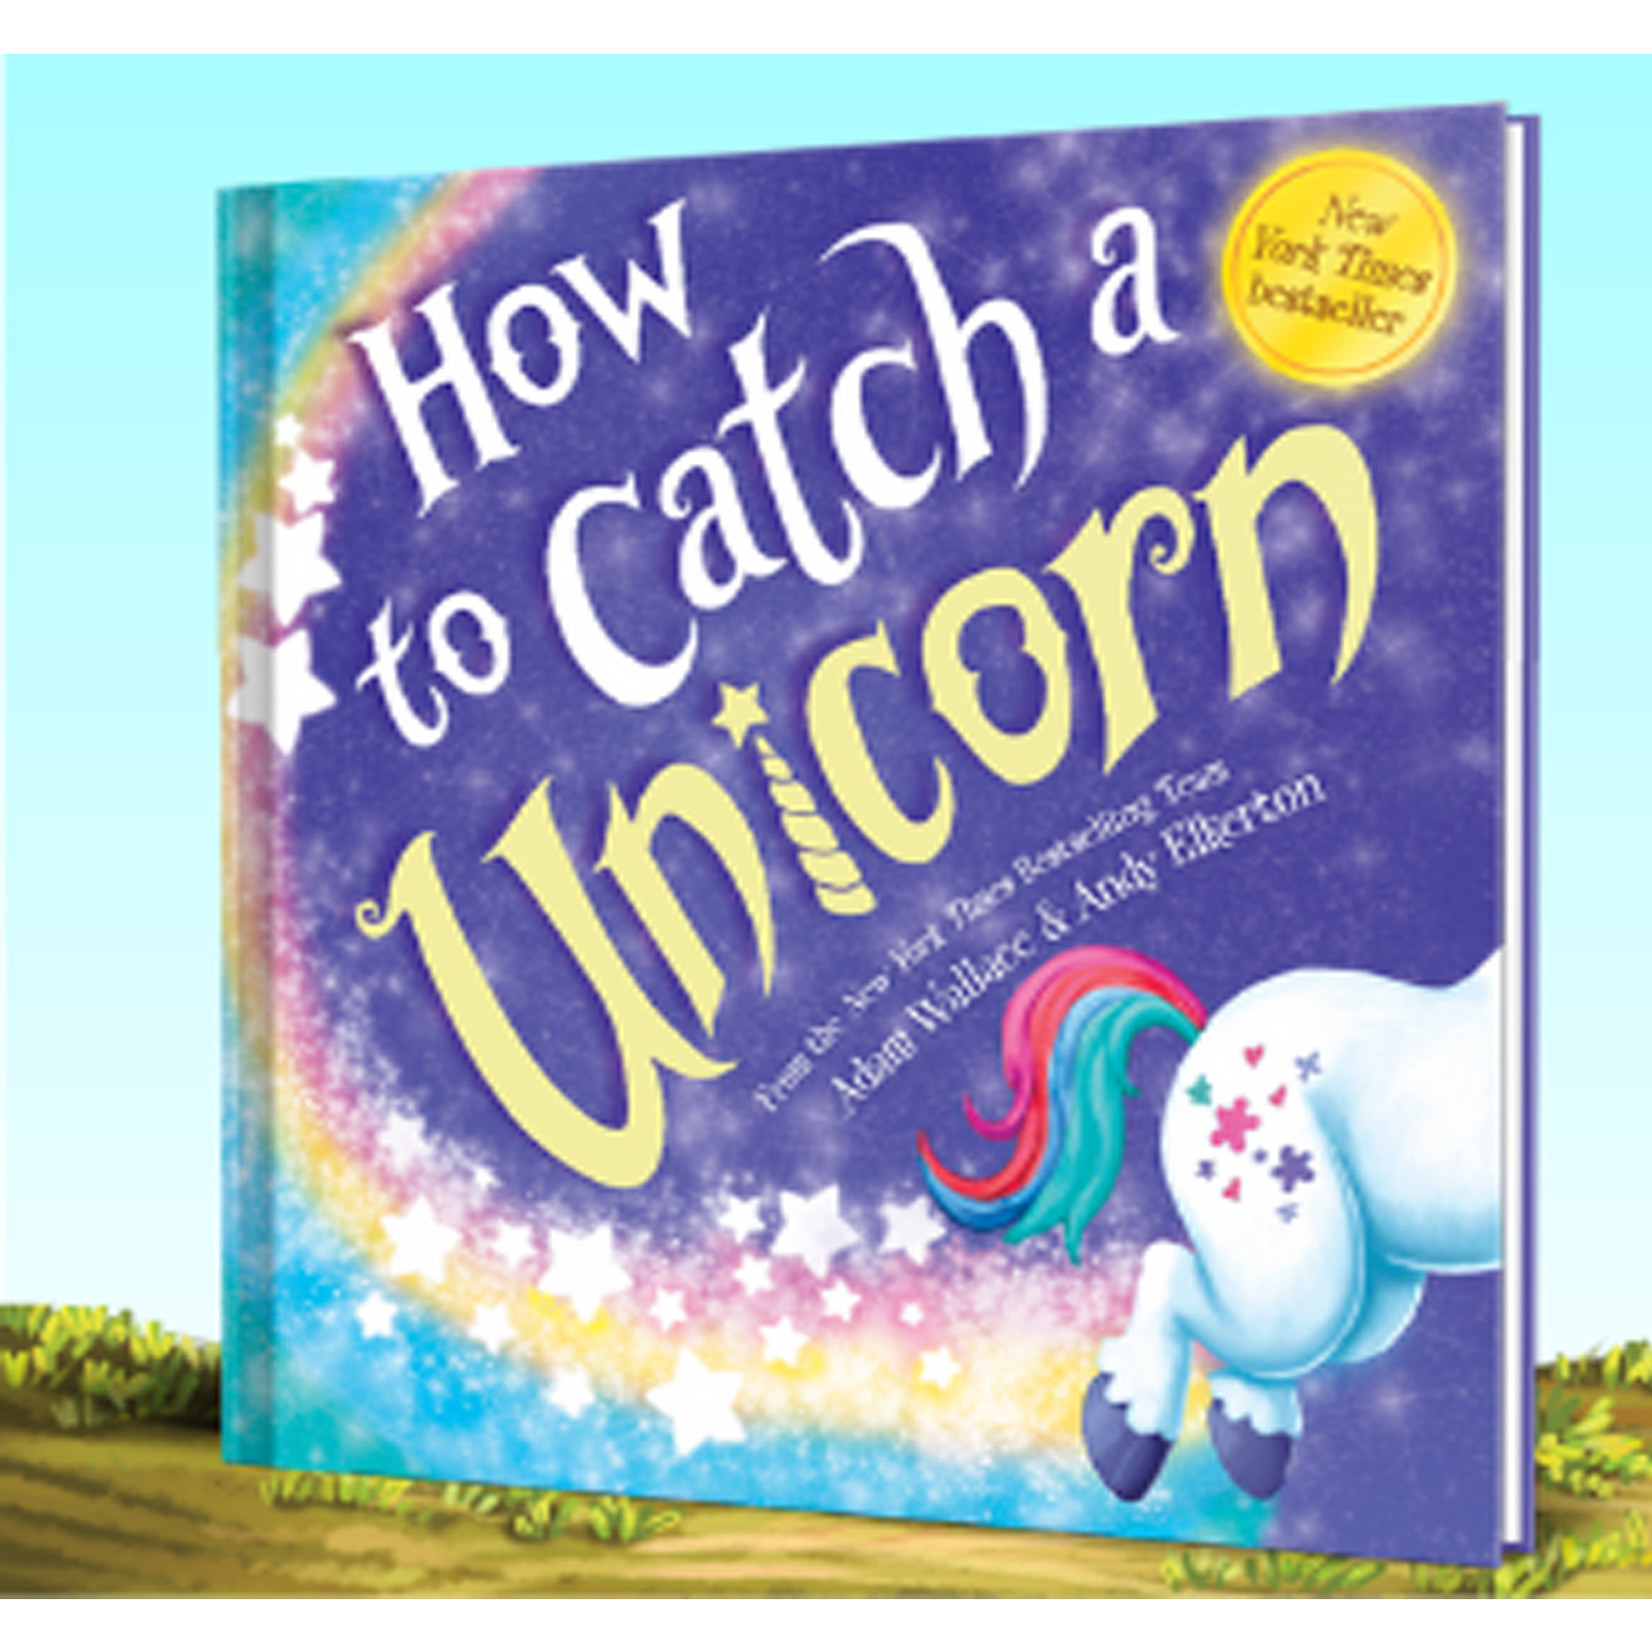 Burke and Hogan How to Catch a Unicorn